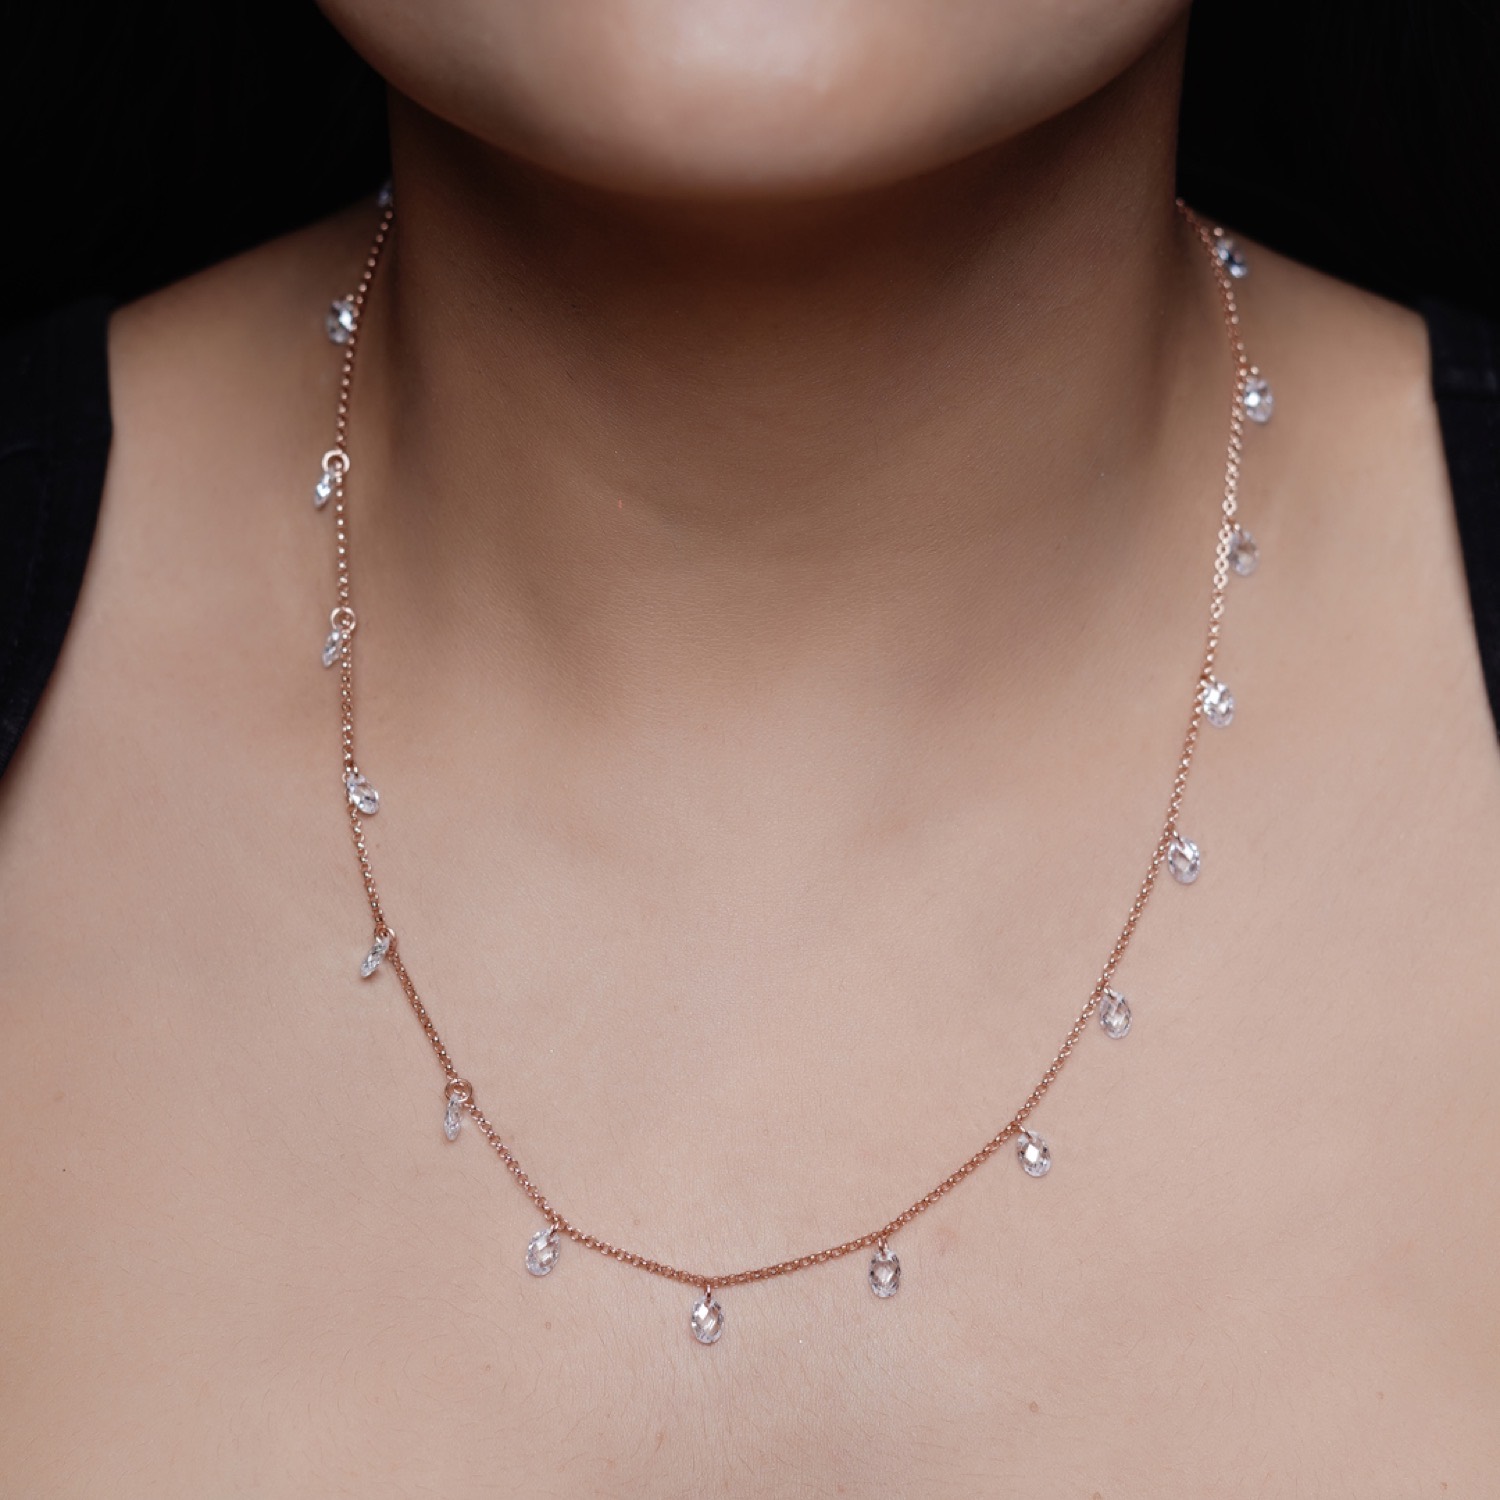 varam_chain_102022_dangling_stones_rose_gold_silver_chain-2